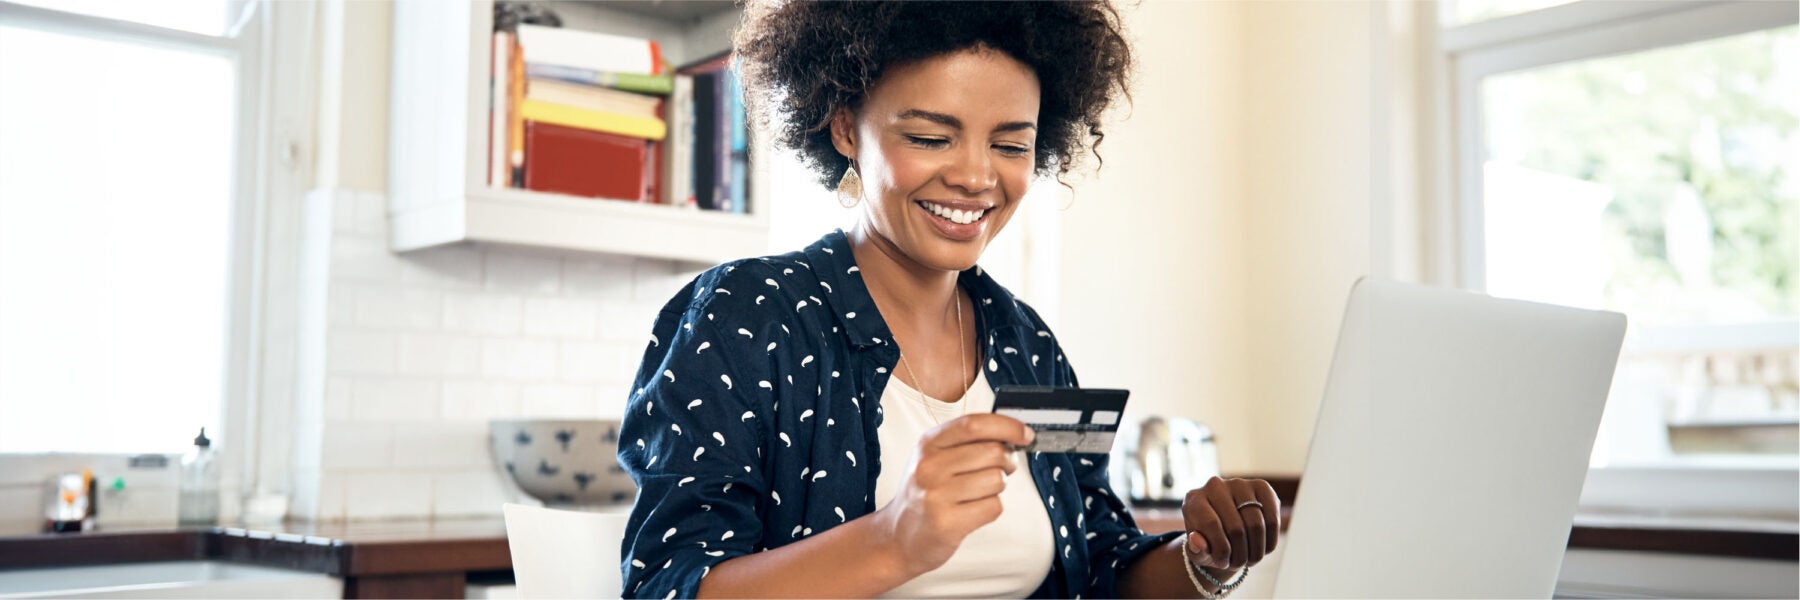 A person learning how to build credit with a secured credit card.